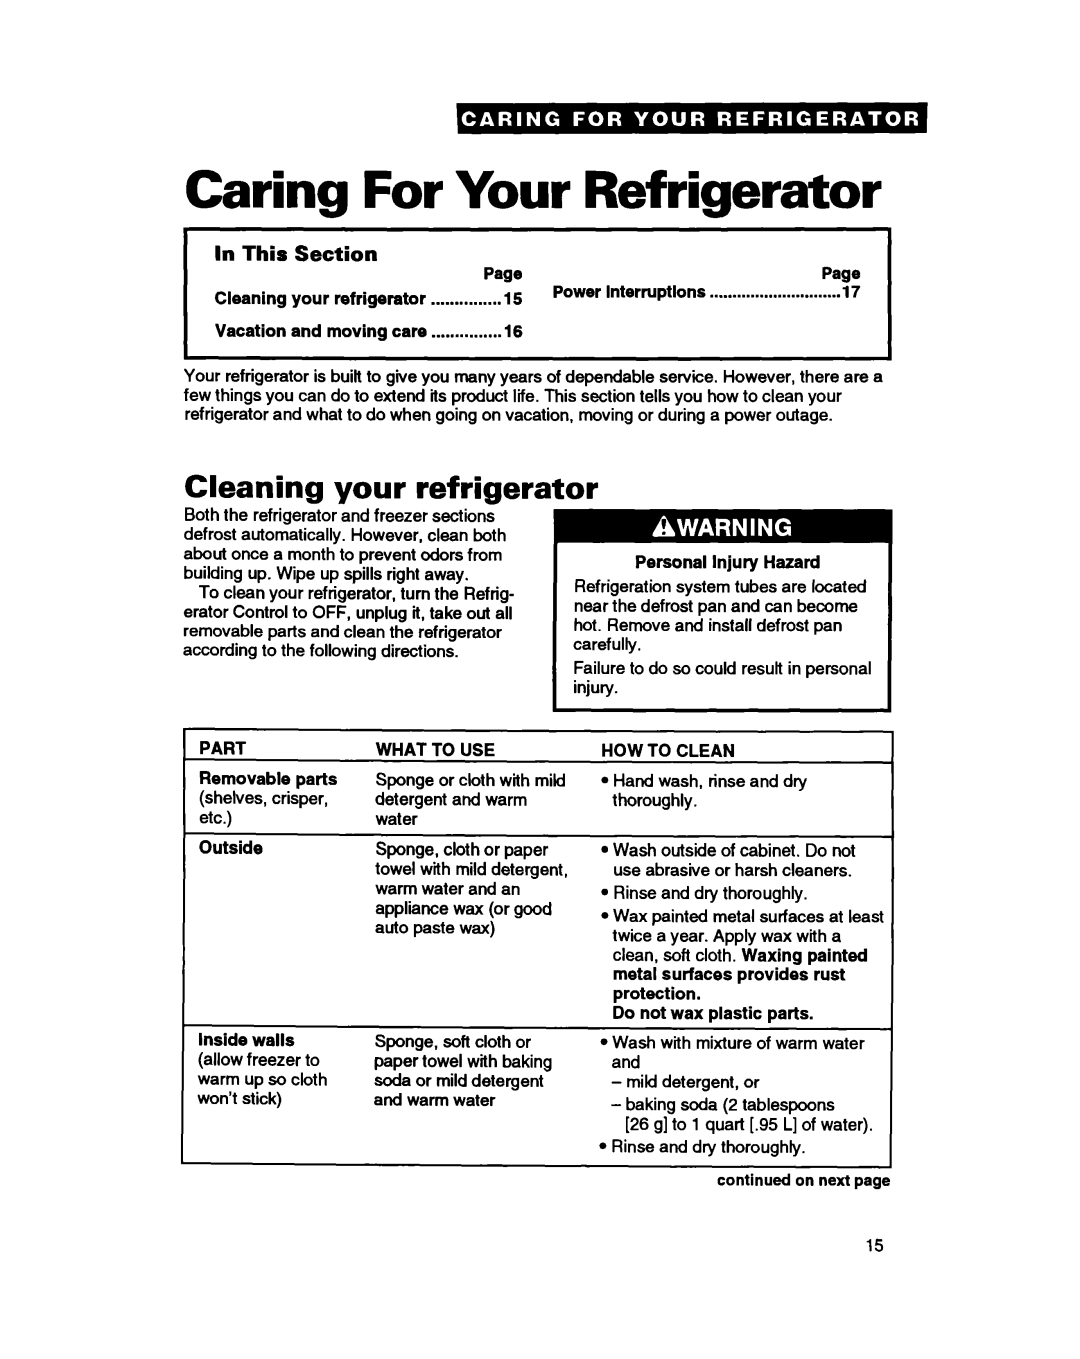 Whirlpool ET18HN warranty Caring For Your Refrigerator, Cleaning your refrigerator, In This 